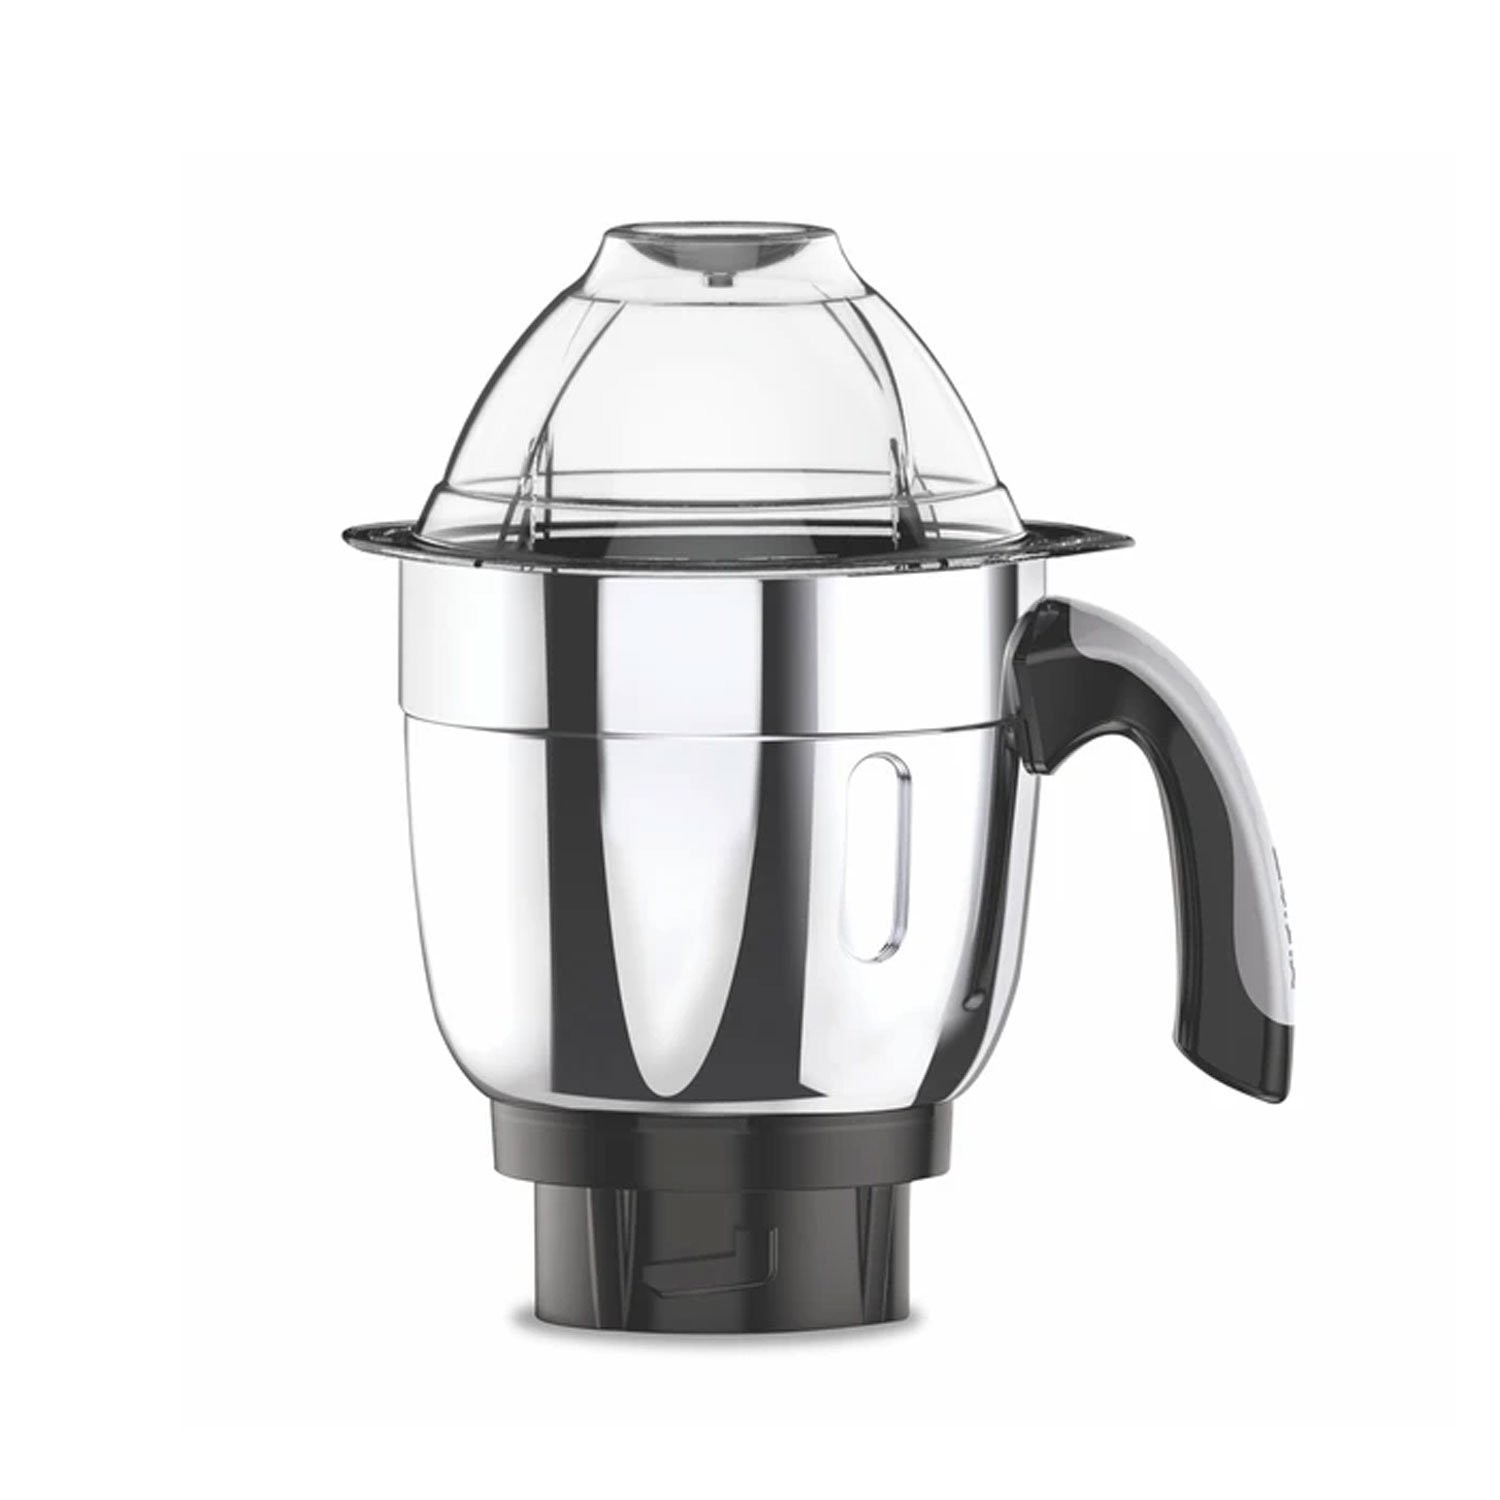 vidiem-eva-nero-650w-stainless-steel-jars-indian-mixer-grinder-spice-coffee-grinder-110v-for-use-in-canada-usa5